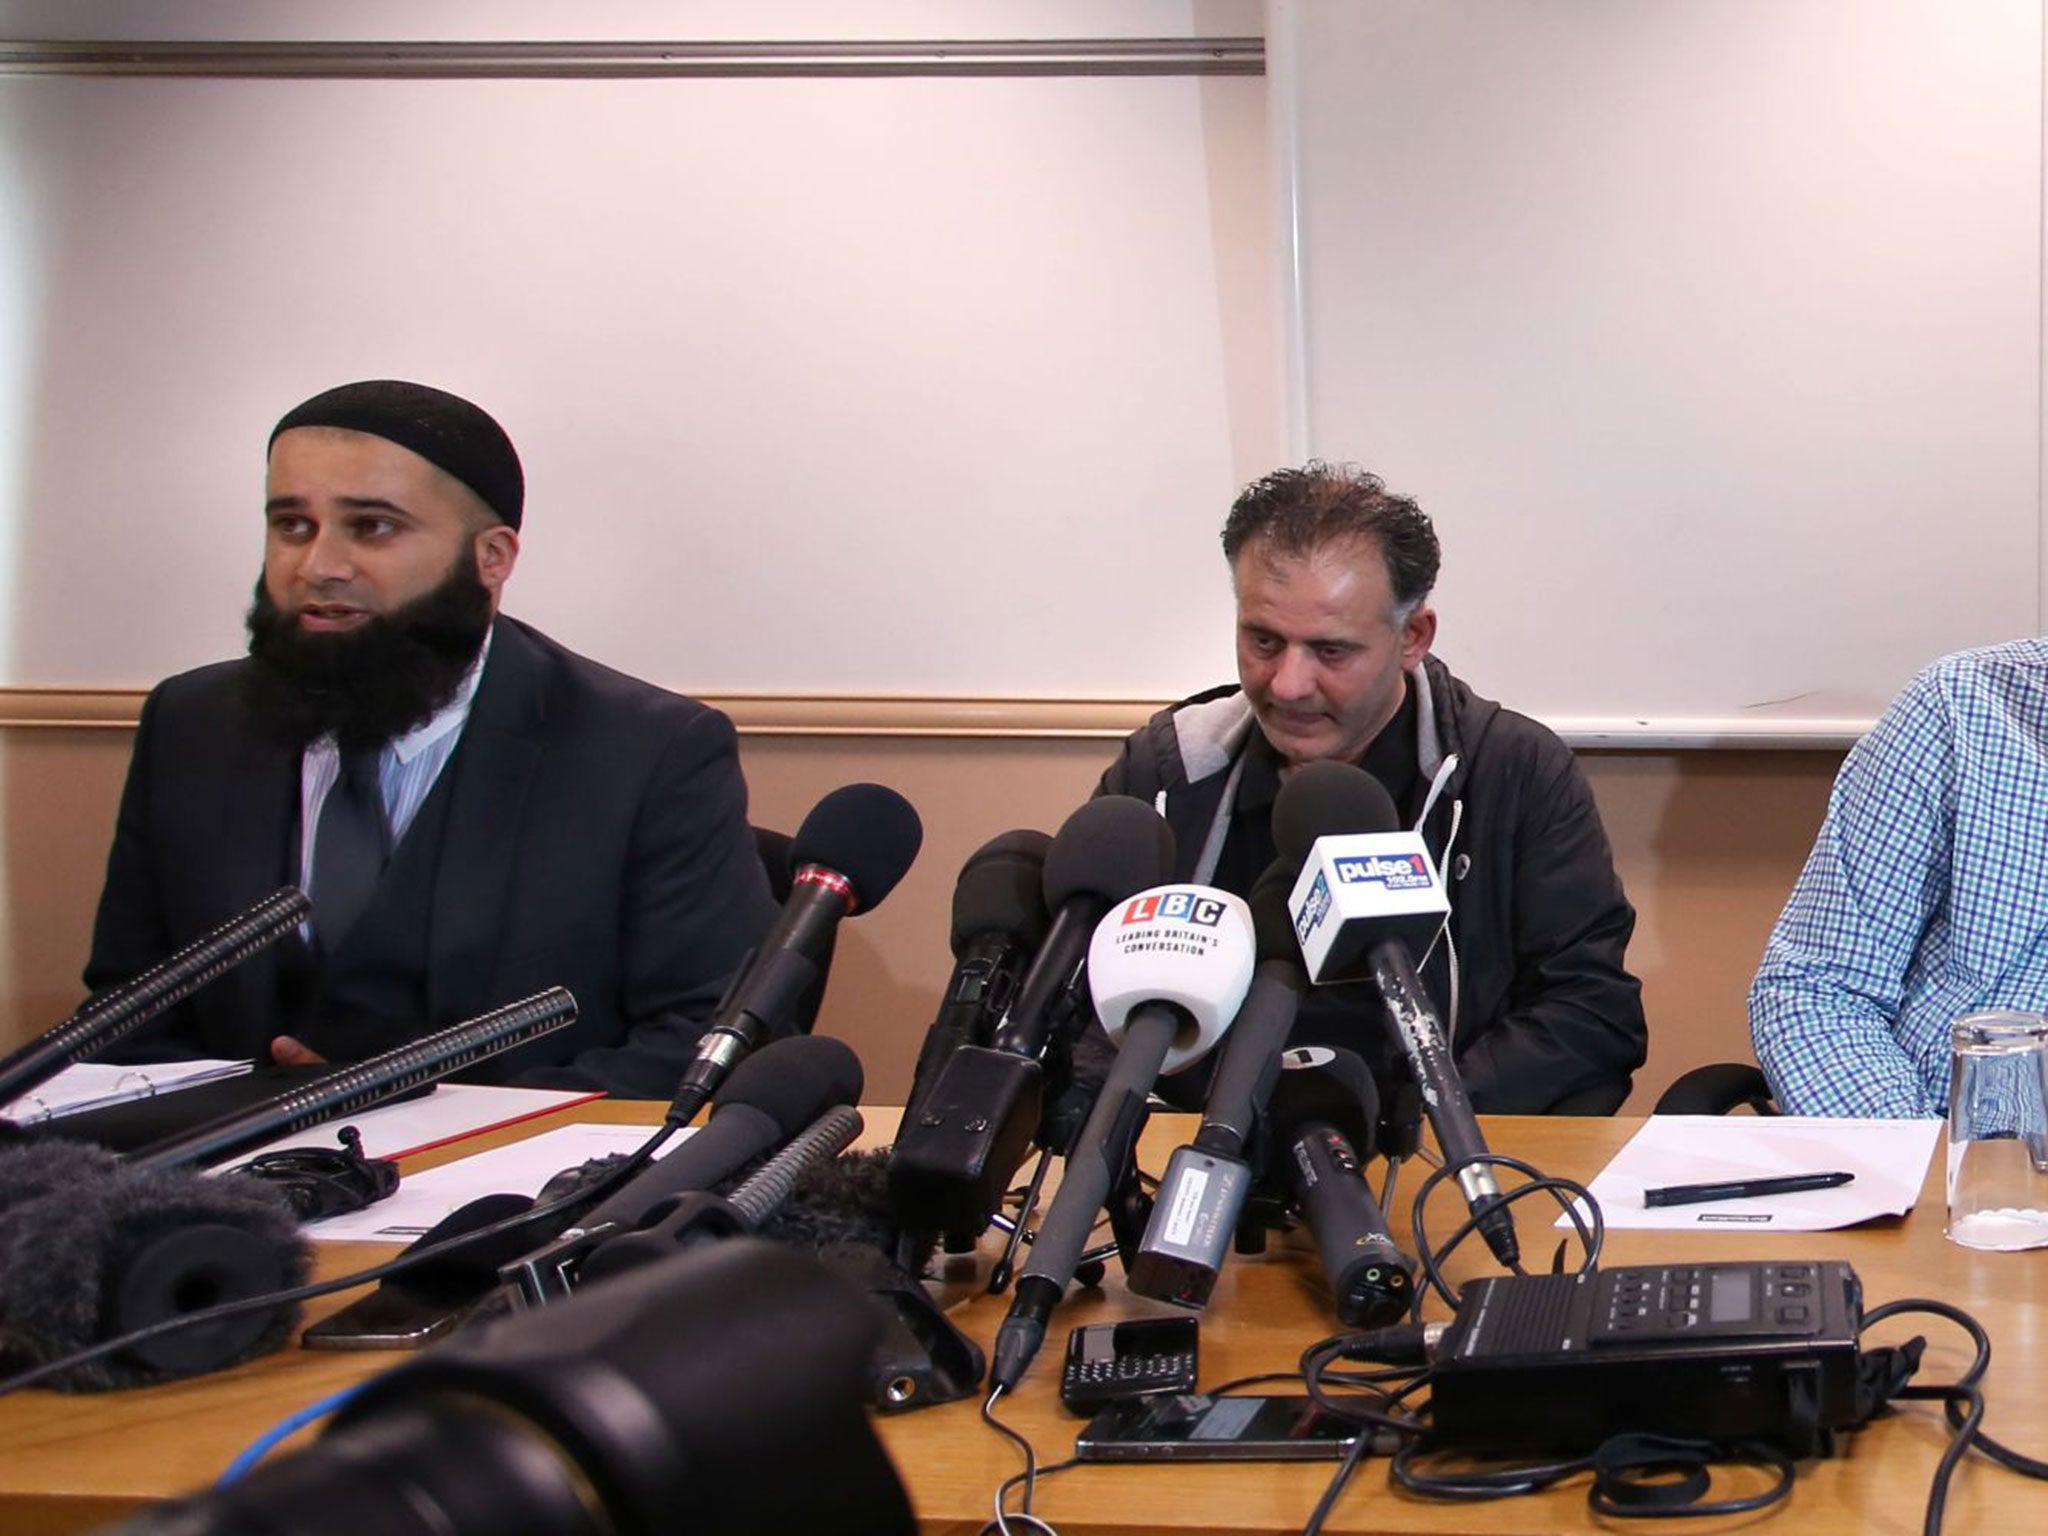 The husbands of three British sisters who disappeared in the Middle East and are feared to have gone to Syria with their nine children broke down in tears Tuesday as they appealed for their families to come home.